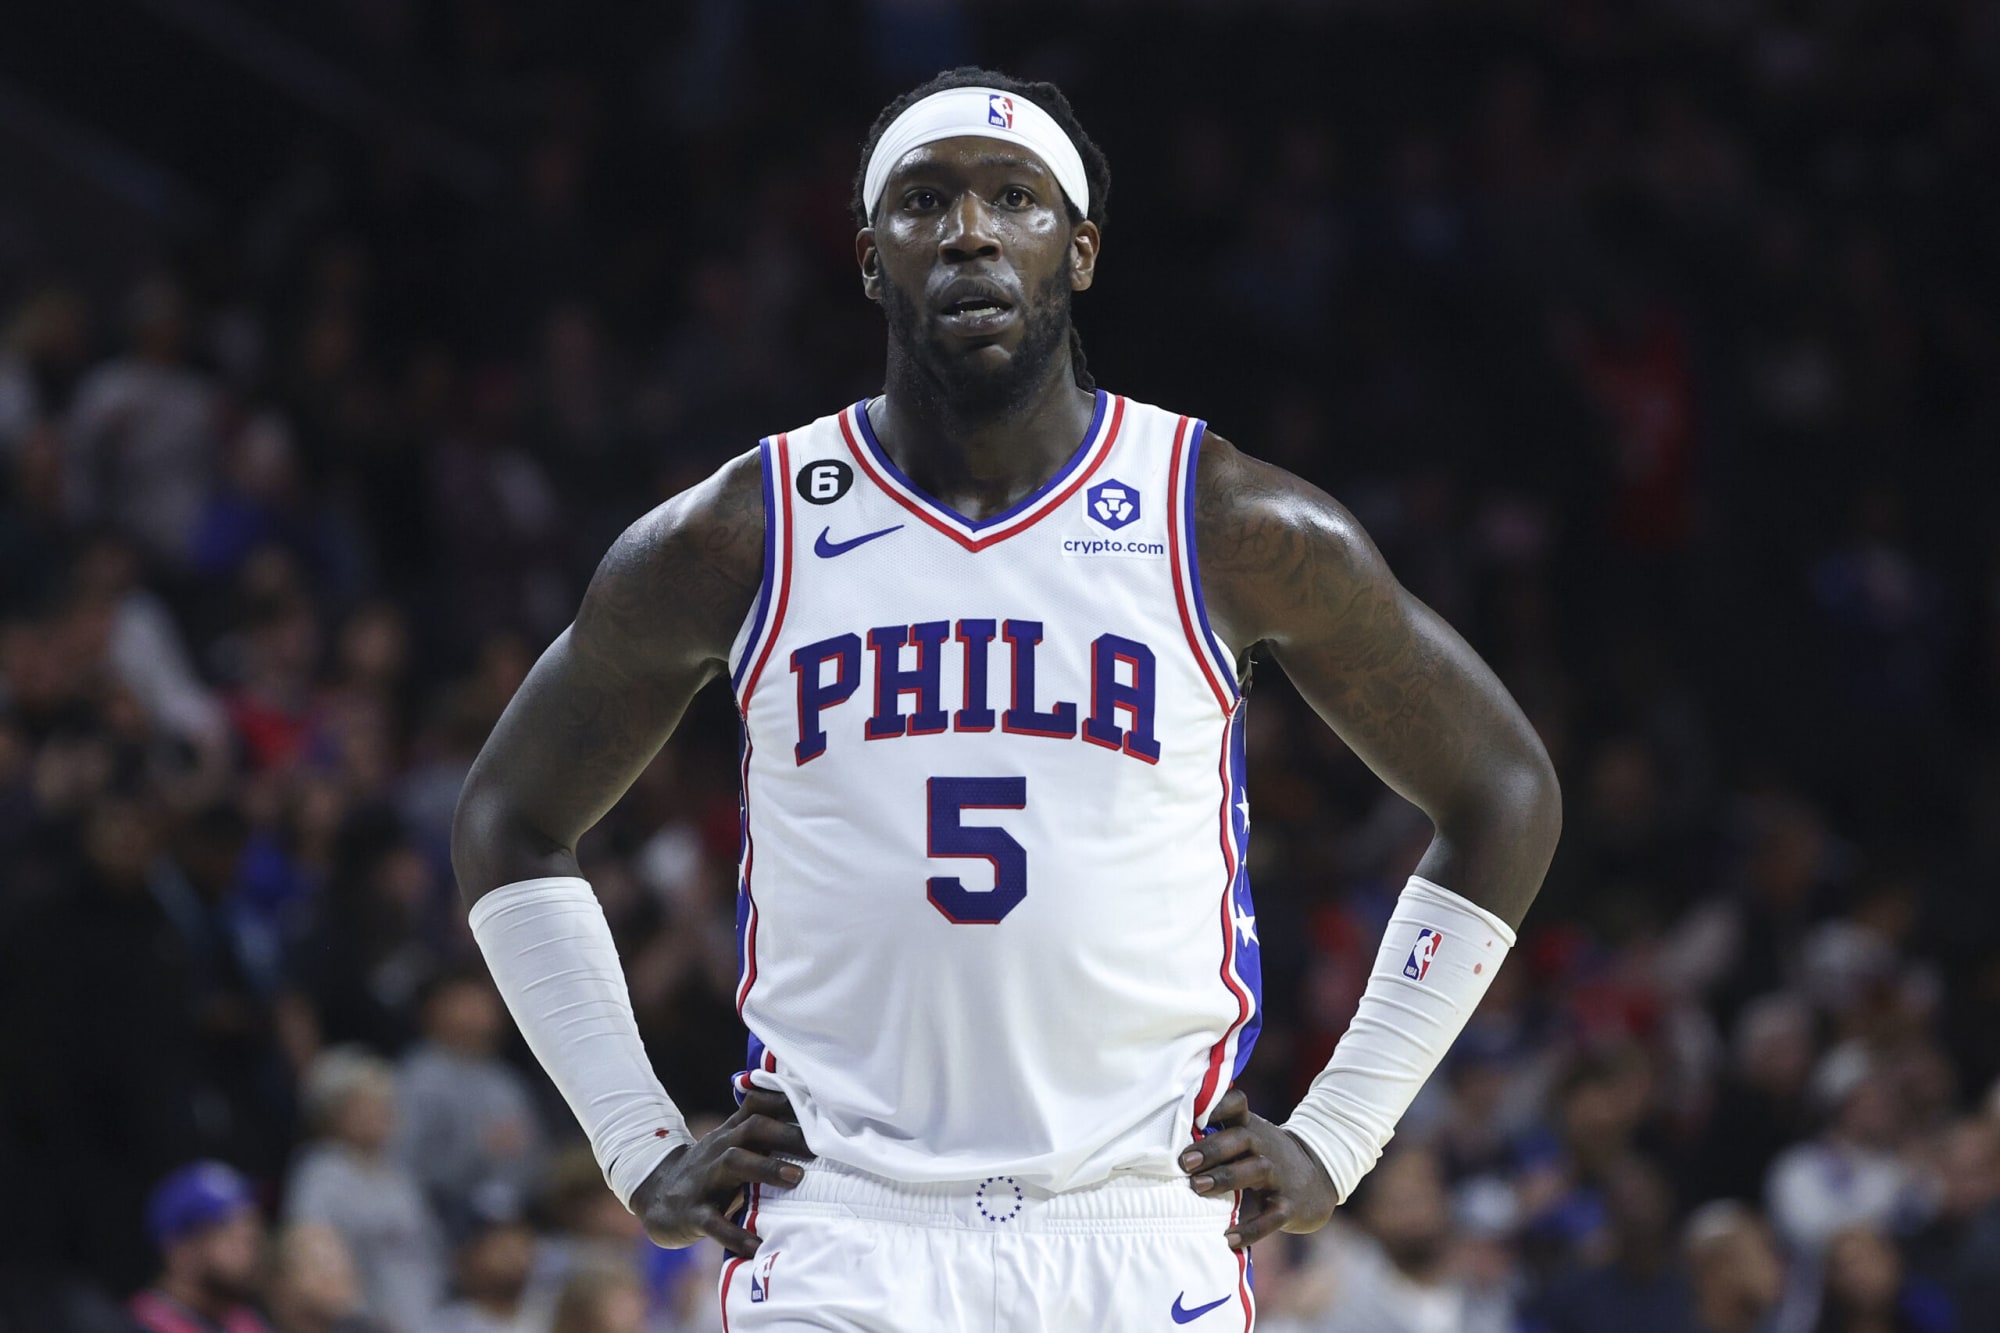 Sixers reportedly expected to keep Harrell on roster after injury